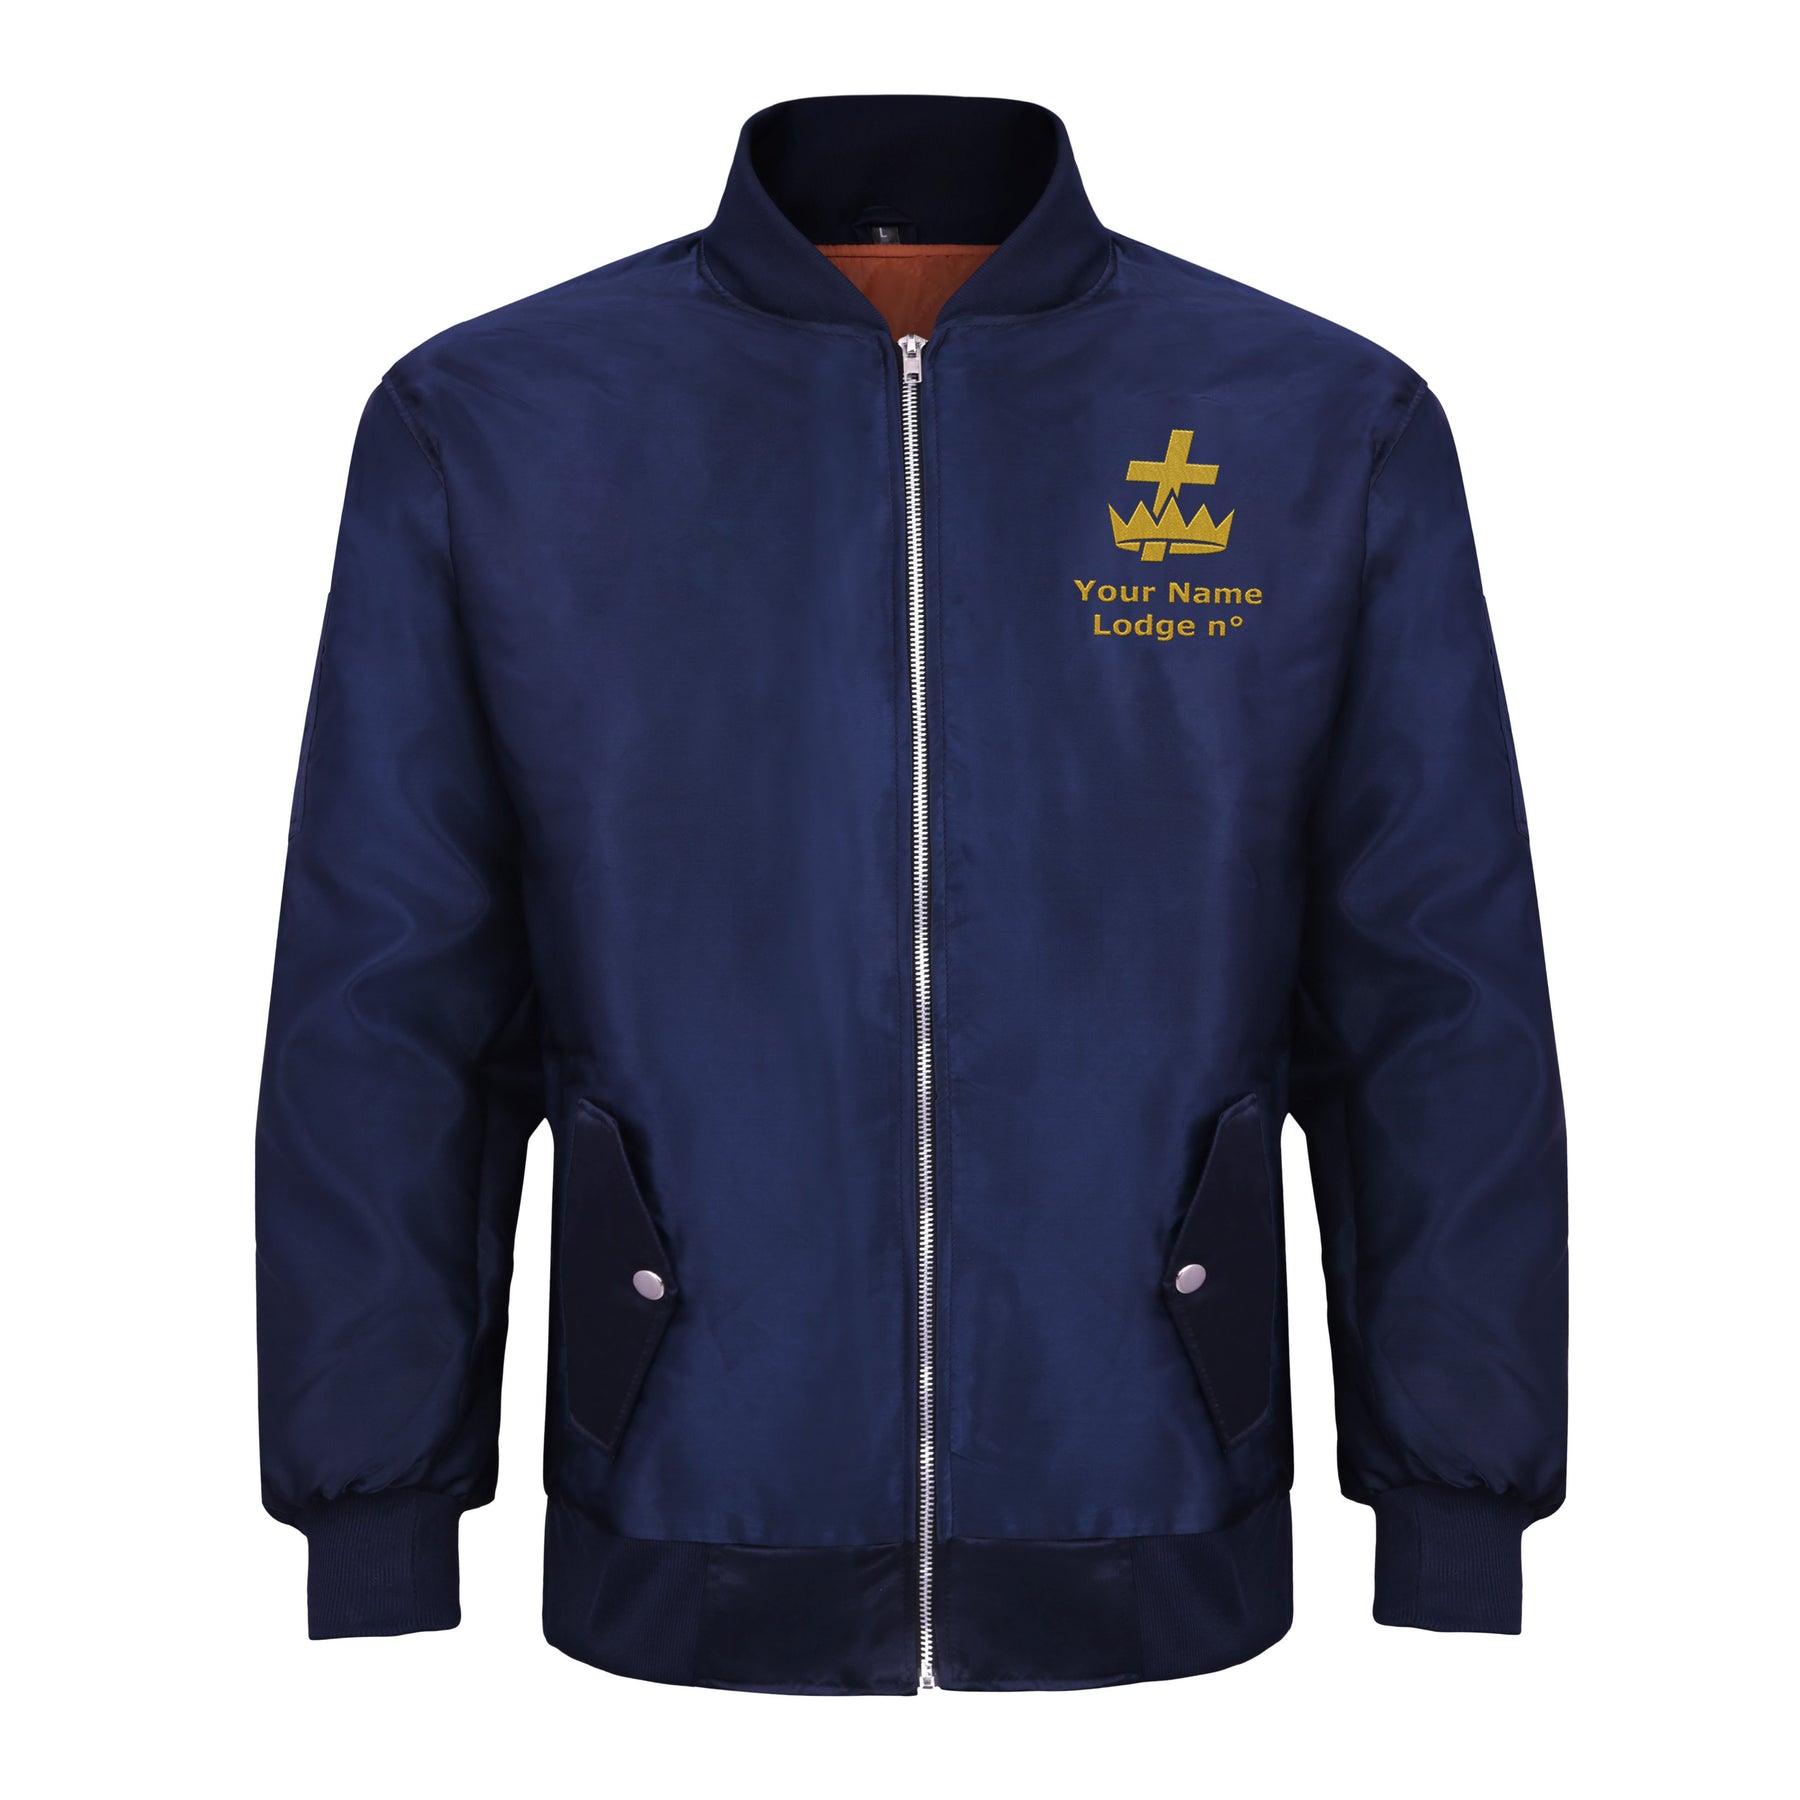 Knights Templar Commandery Jacket - Blue Color With Gold Embroidery - Bricks Masons